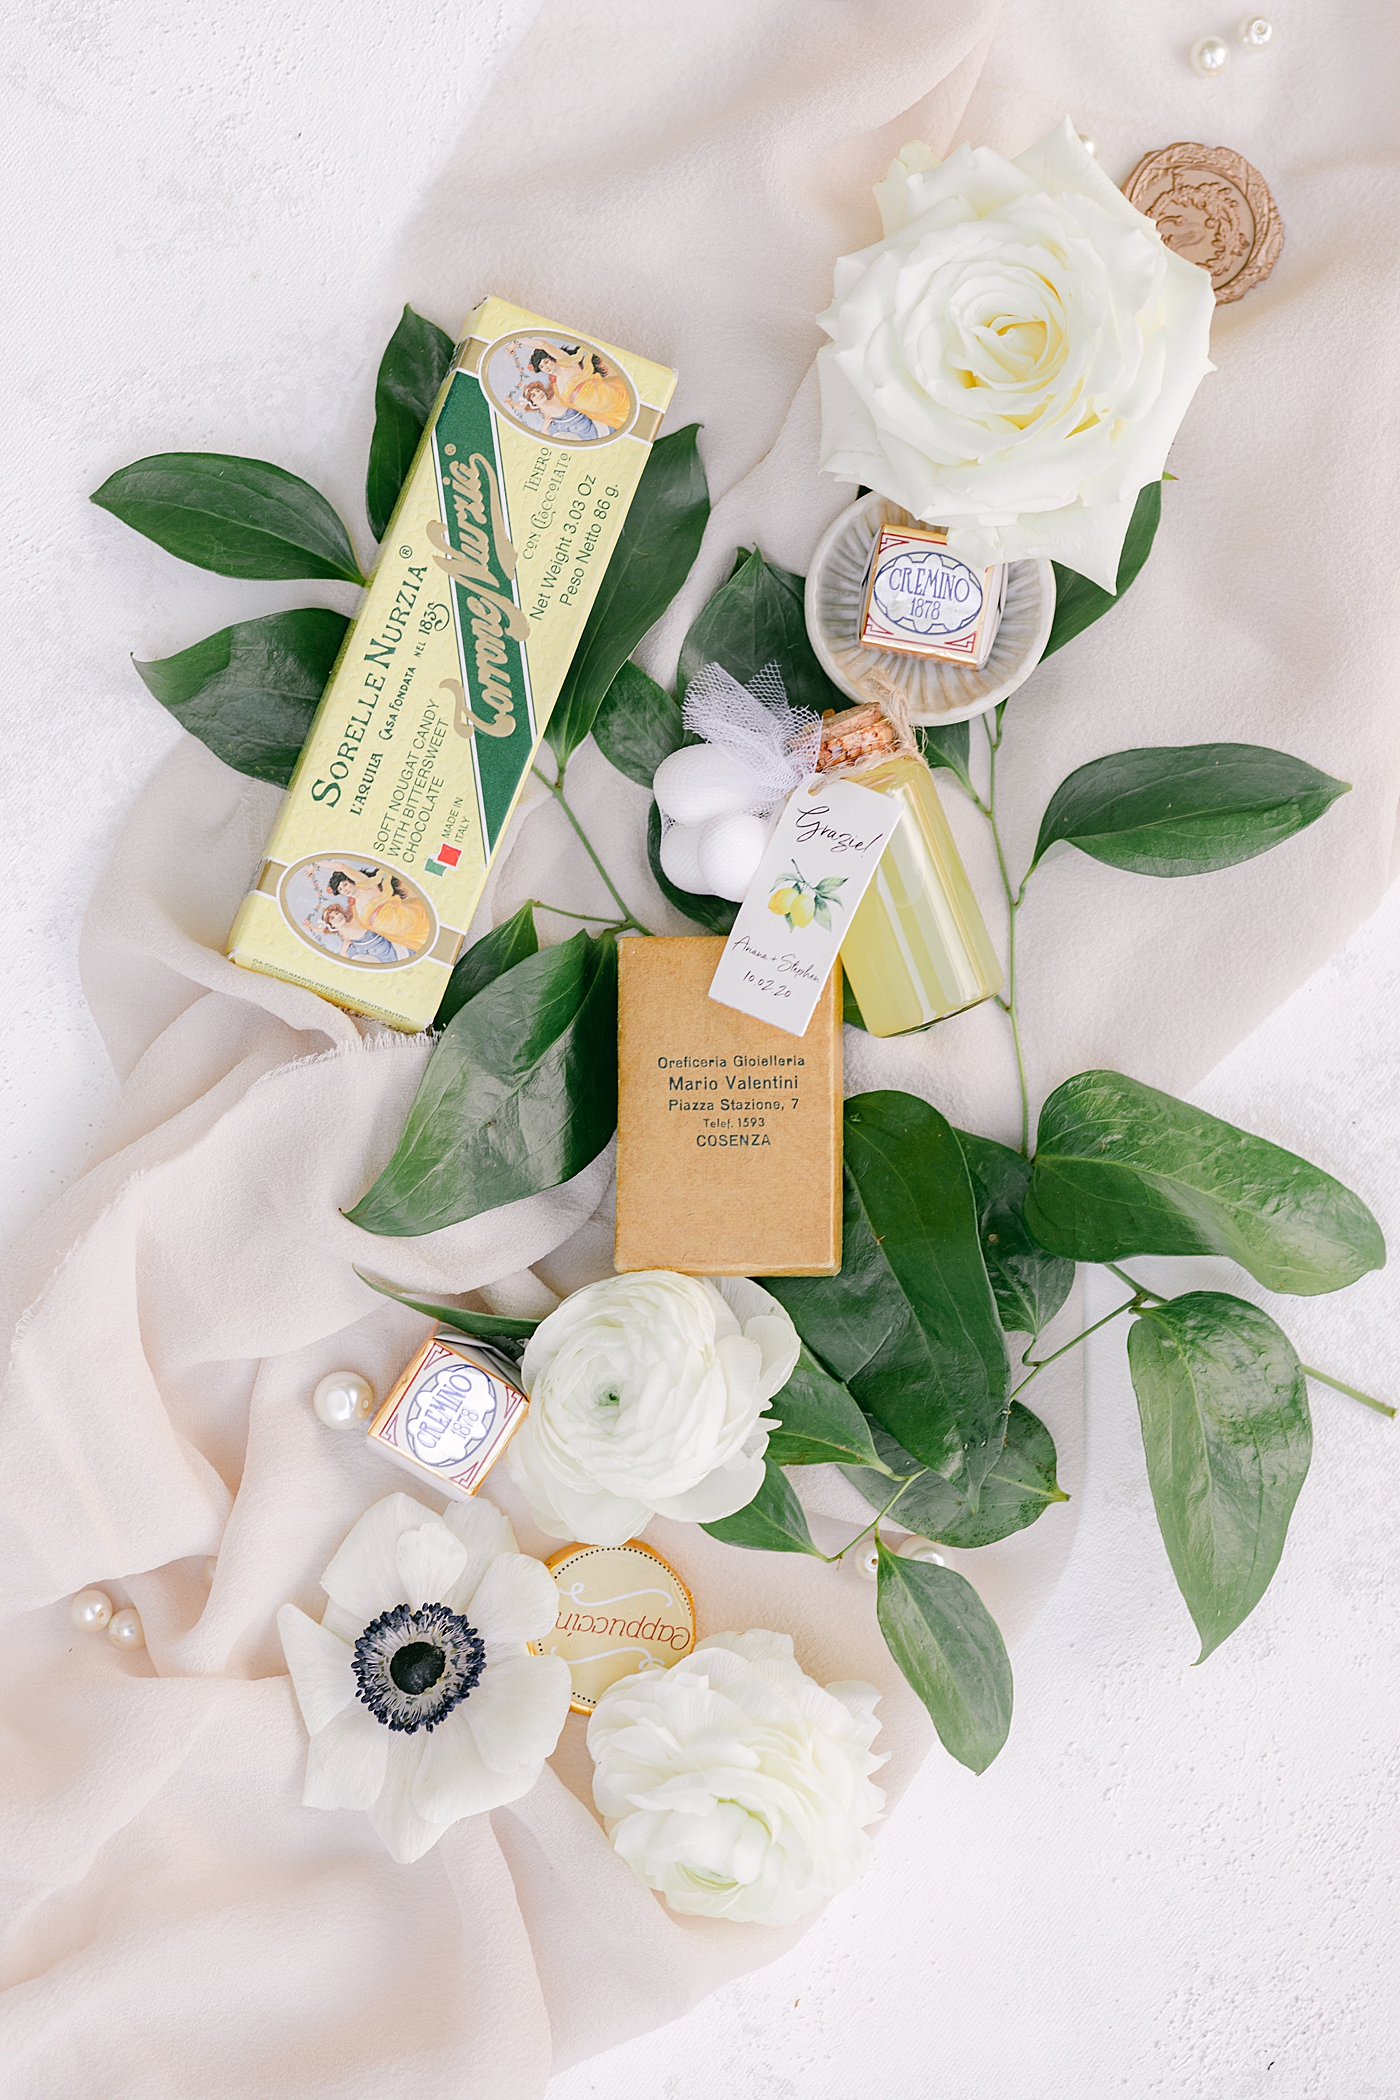 Wedding favors with Italian details | Photo by Hope Helmuth Photography